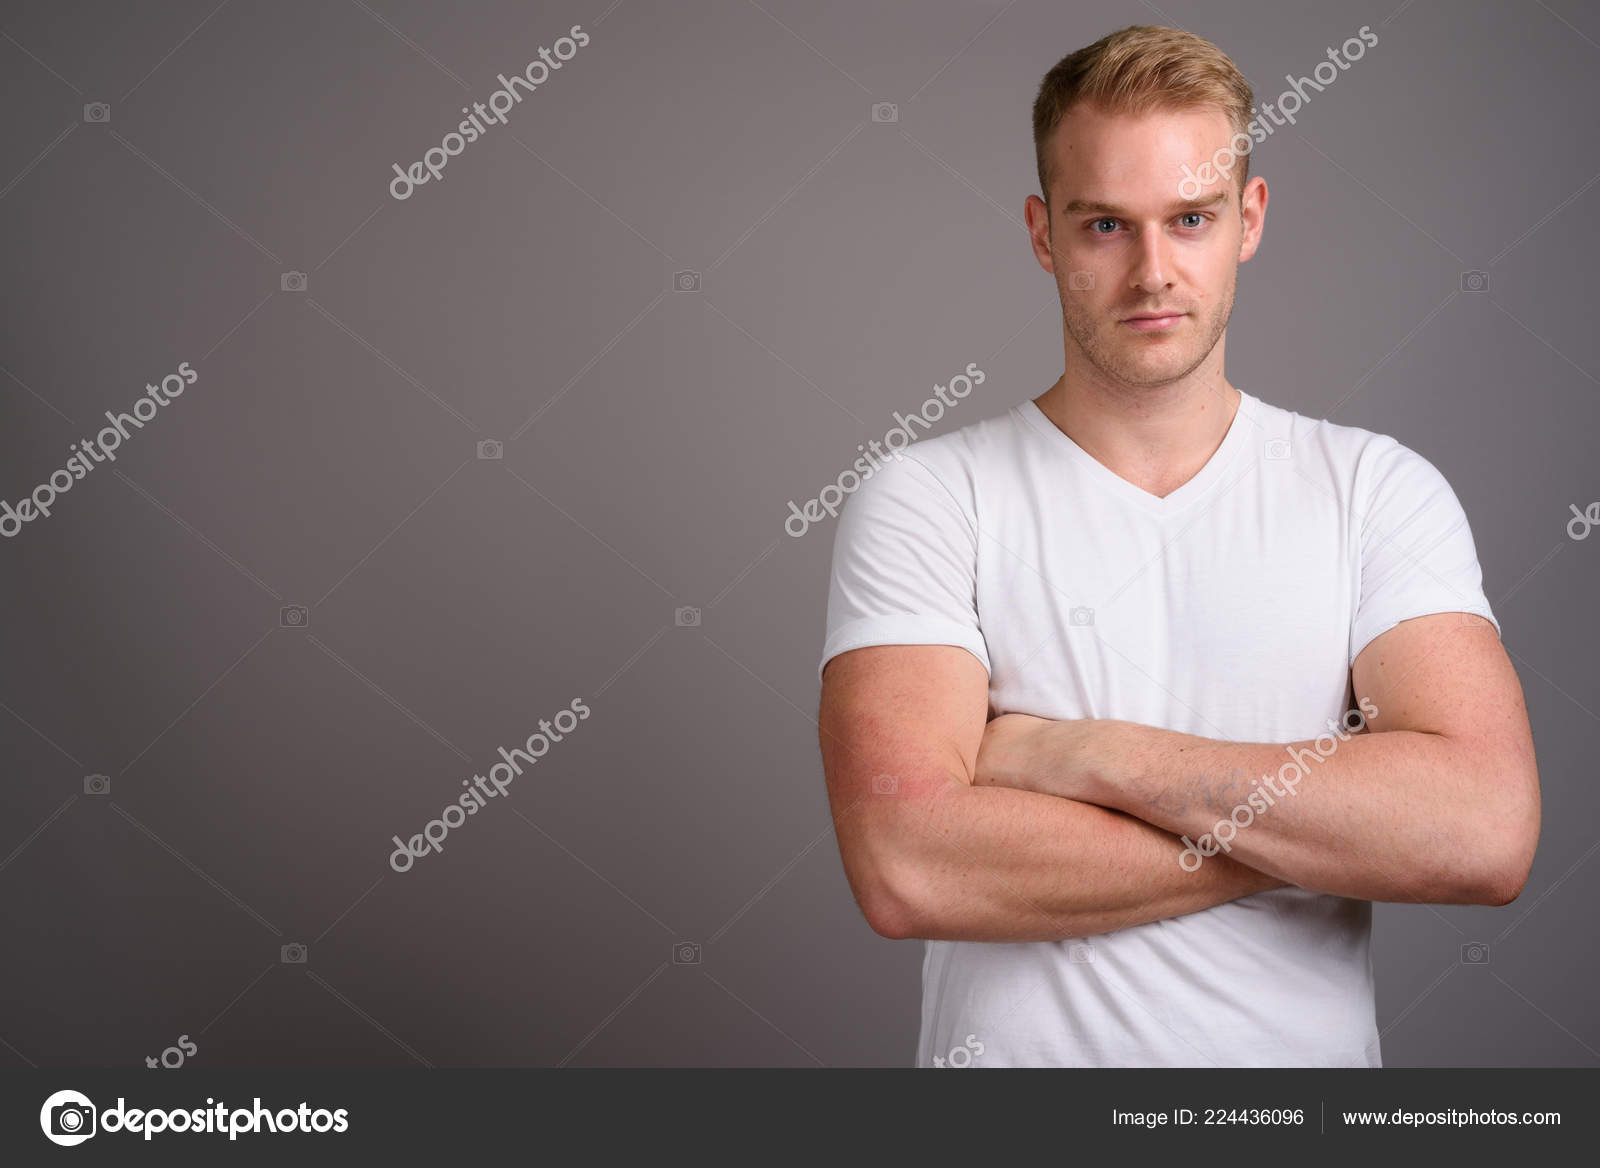 Young Handsome Man With Blond Hair Against Gray Background Stock